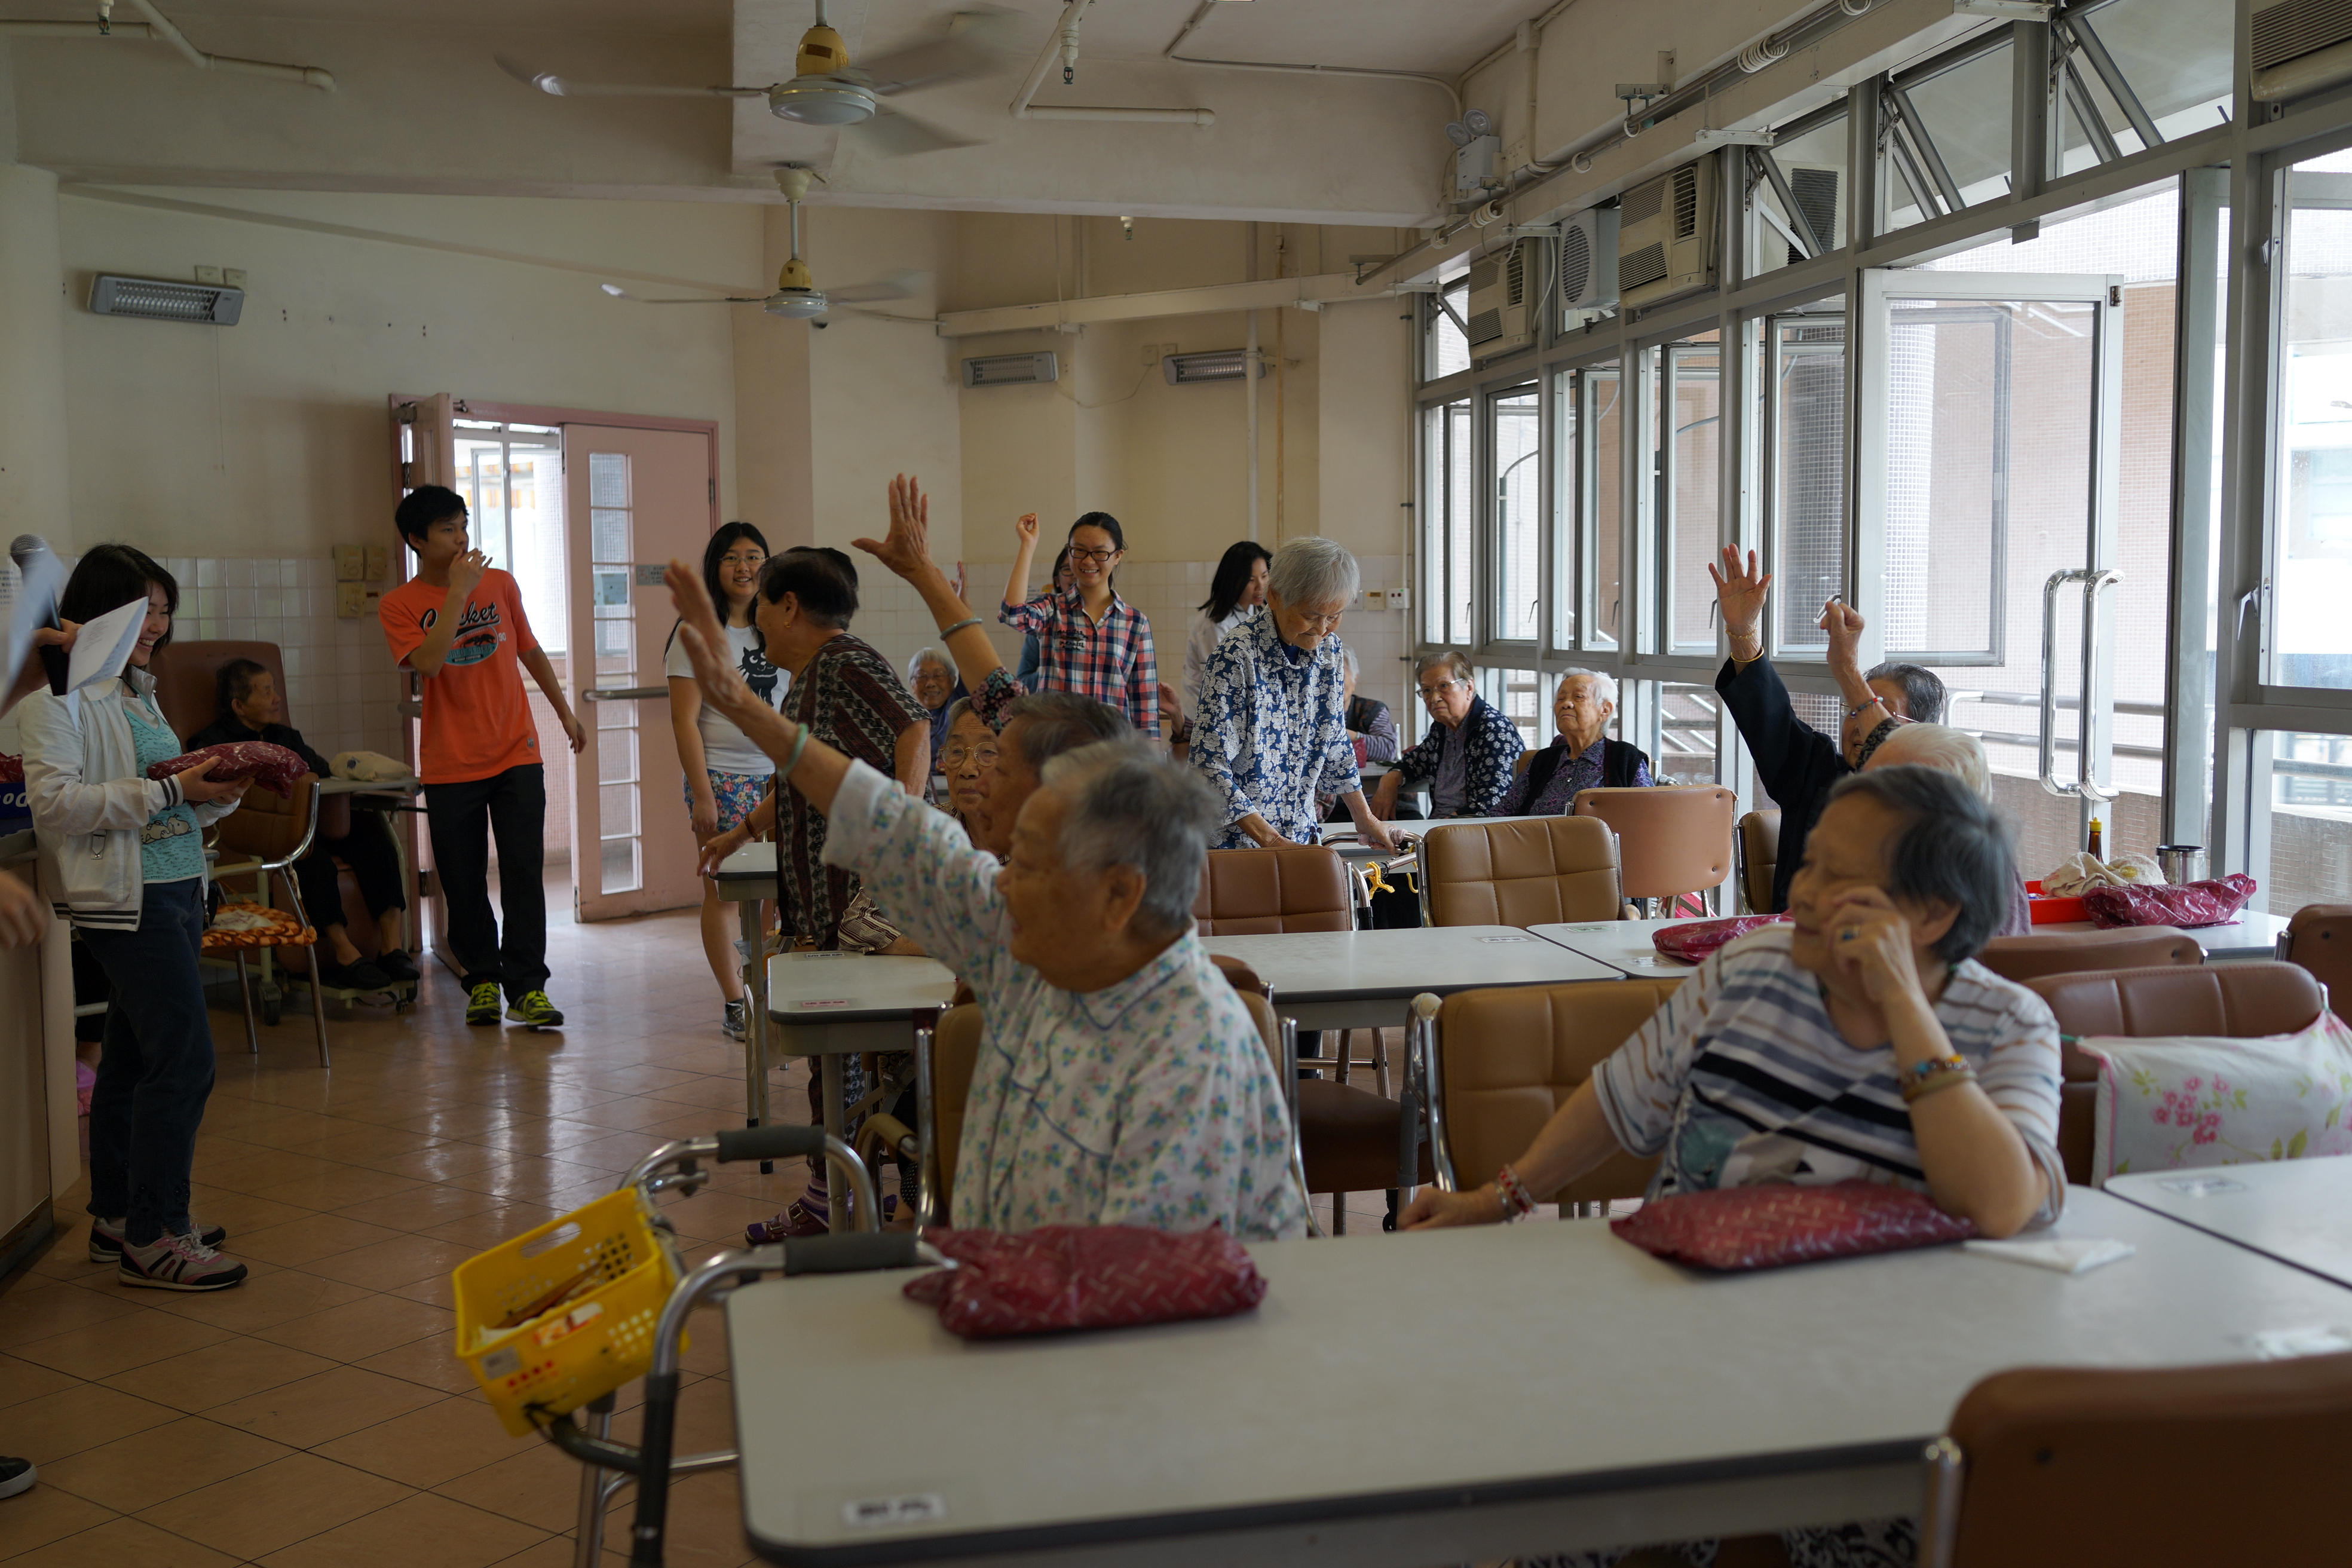 An afternoon serving the elderly: a visit to the Po Leung Kuk Wong Chuk Hang Service for the Elderly - Photo - 3